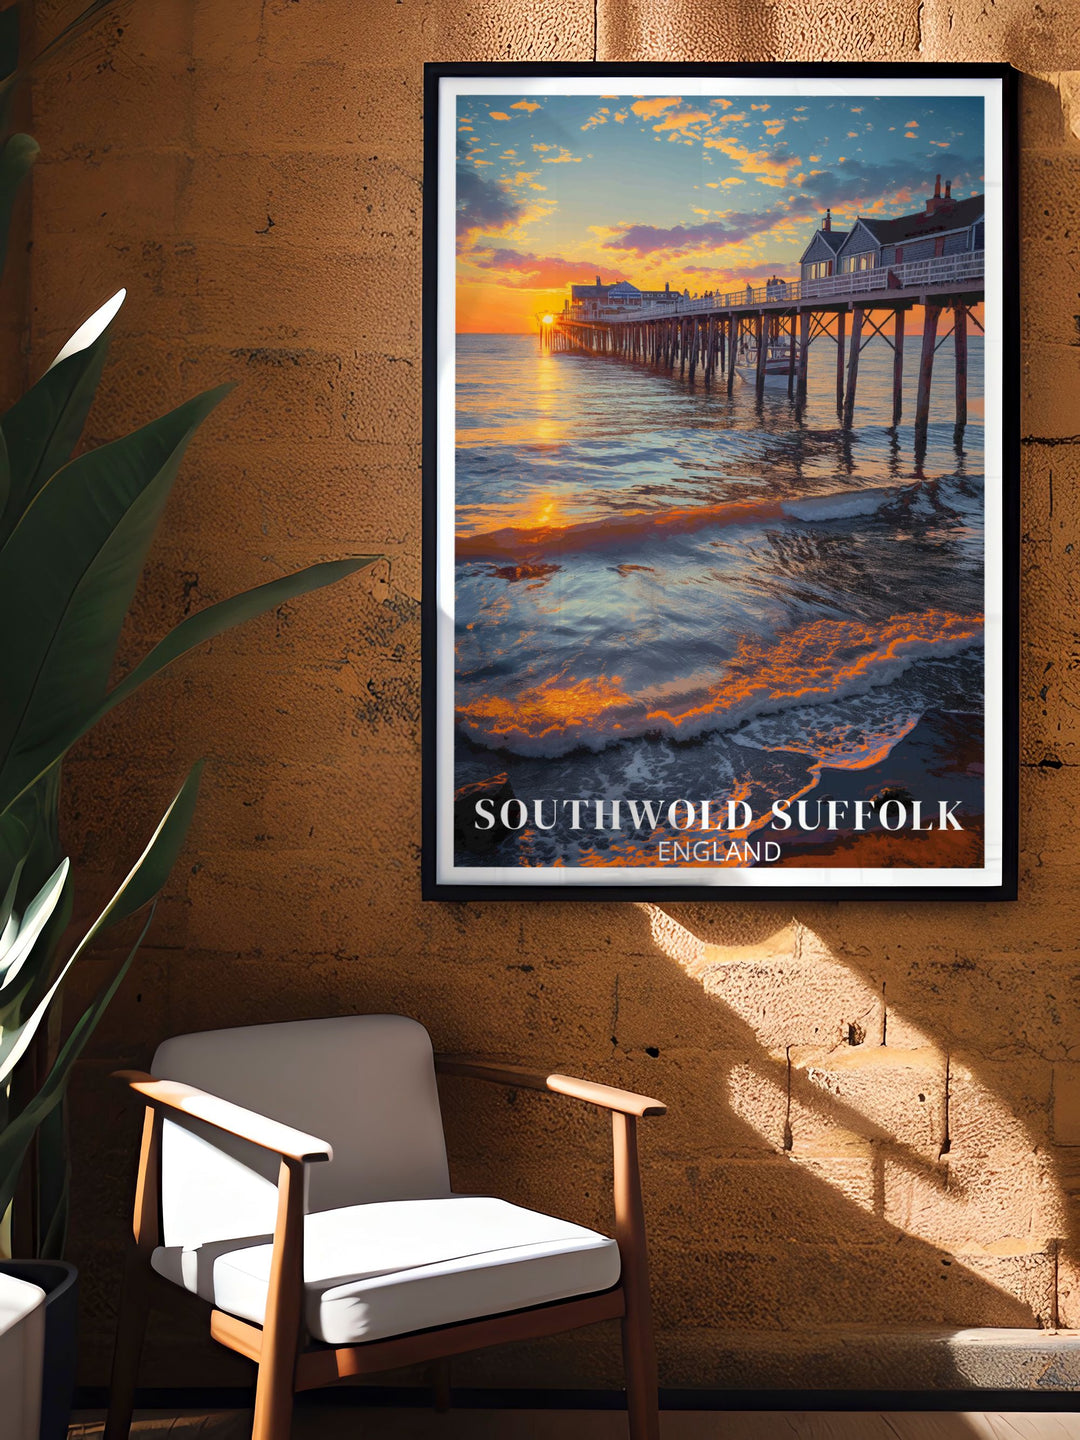 Southwold Beach Huts and Seaside Poster capturing the vibrant colors and tranquil beauty of Southwolds coastline with the iconic Southwold Lighthouse and Pier a must have vintage travel print for art collectors and lovers of coastal scenery